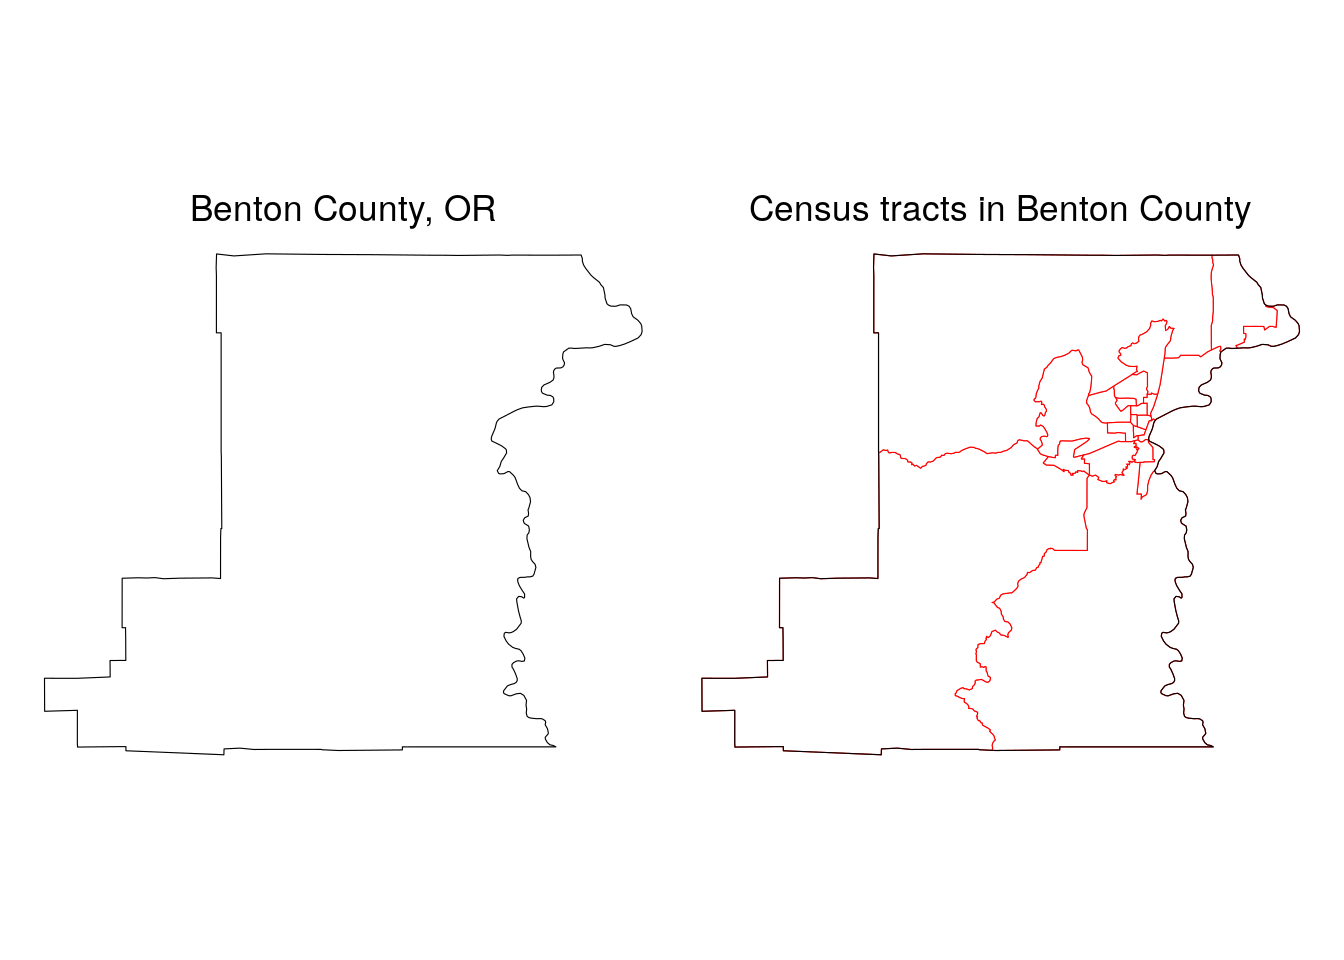 Benton County, OR Census tracts in relationship to the county boundary